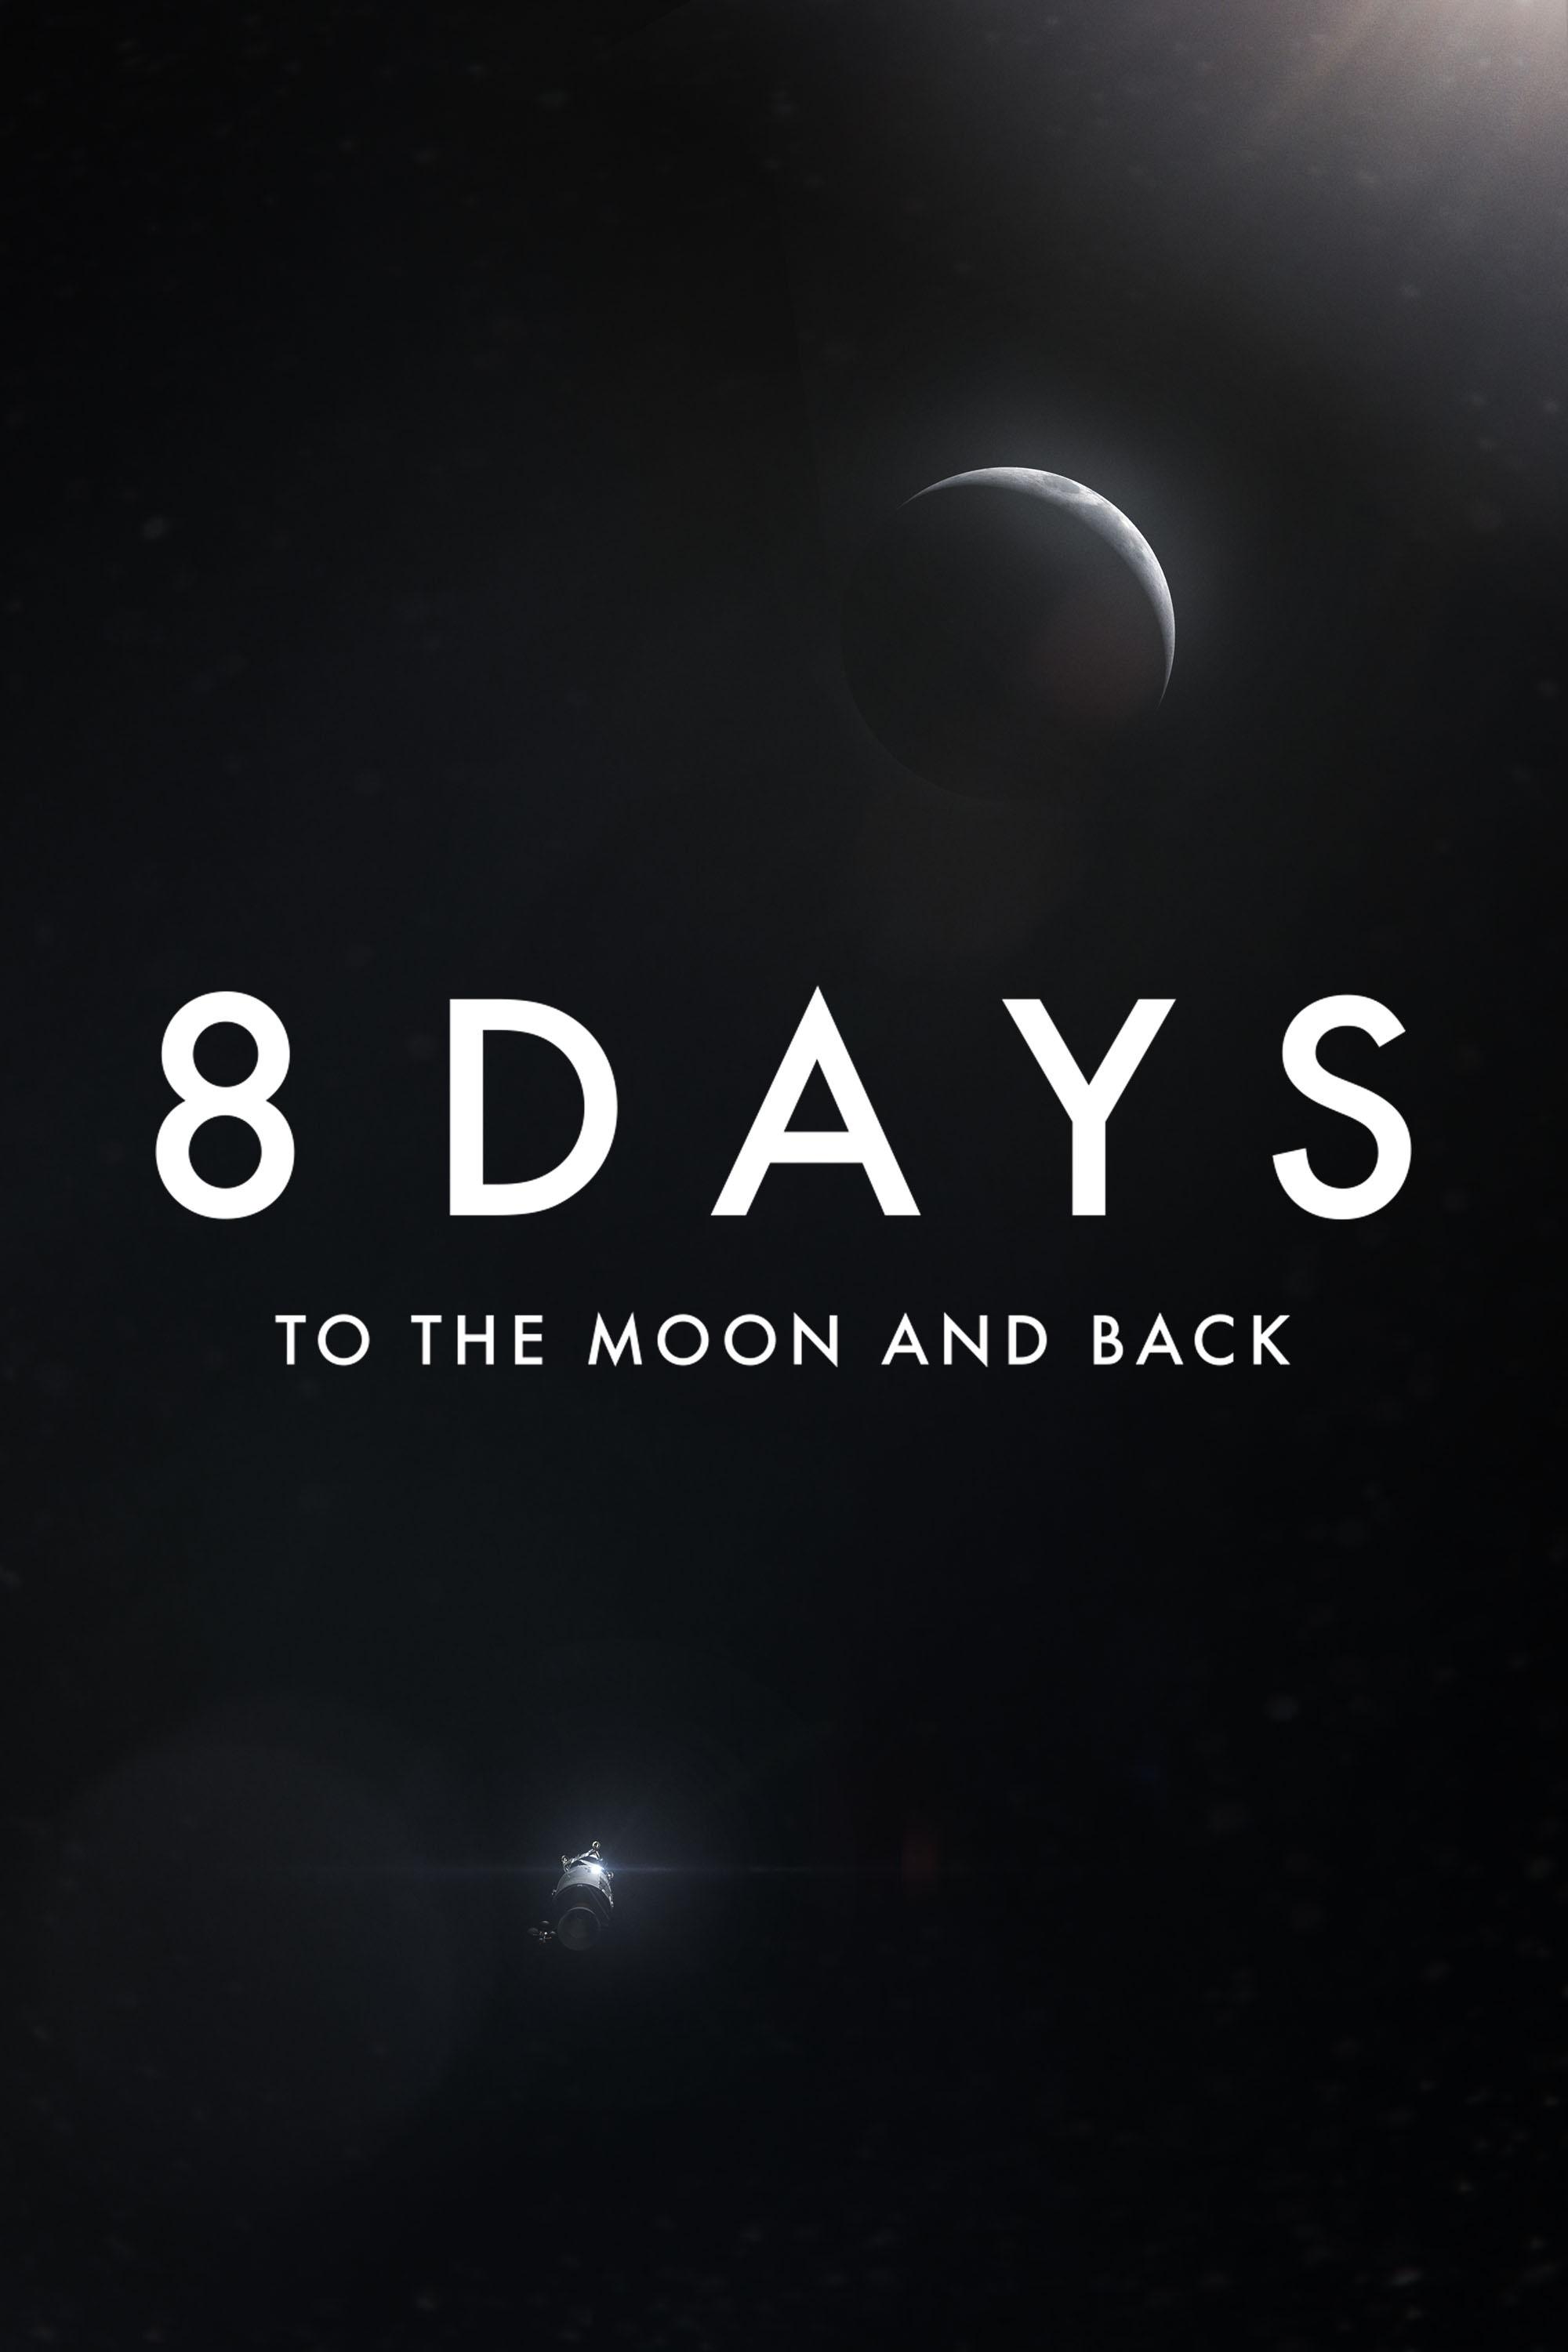 8 Days: To the Moon and Back show's poster